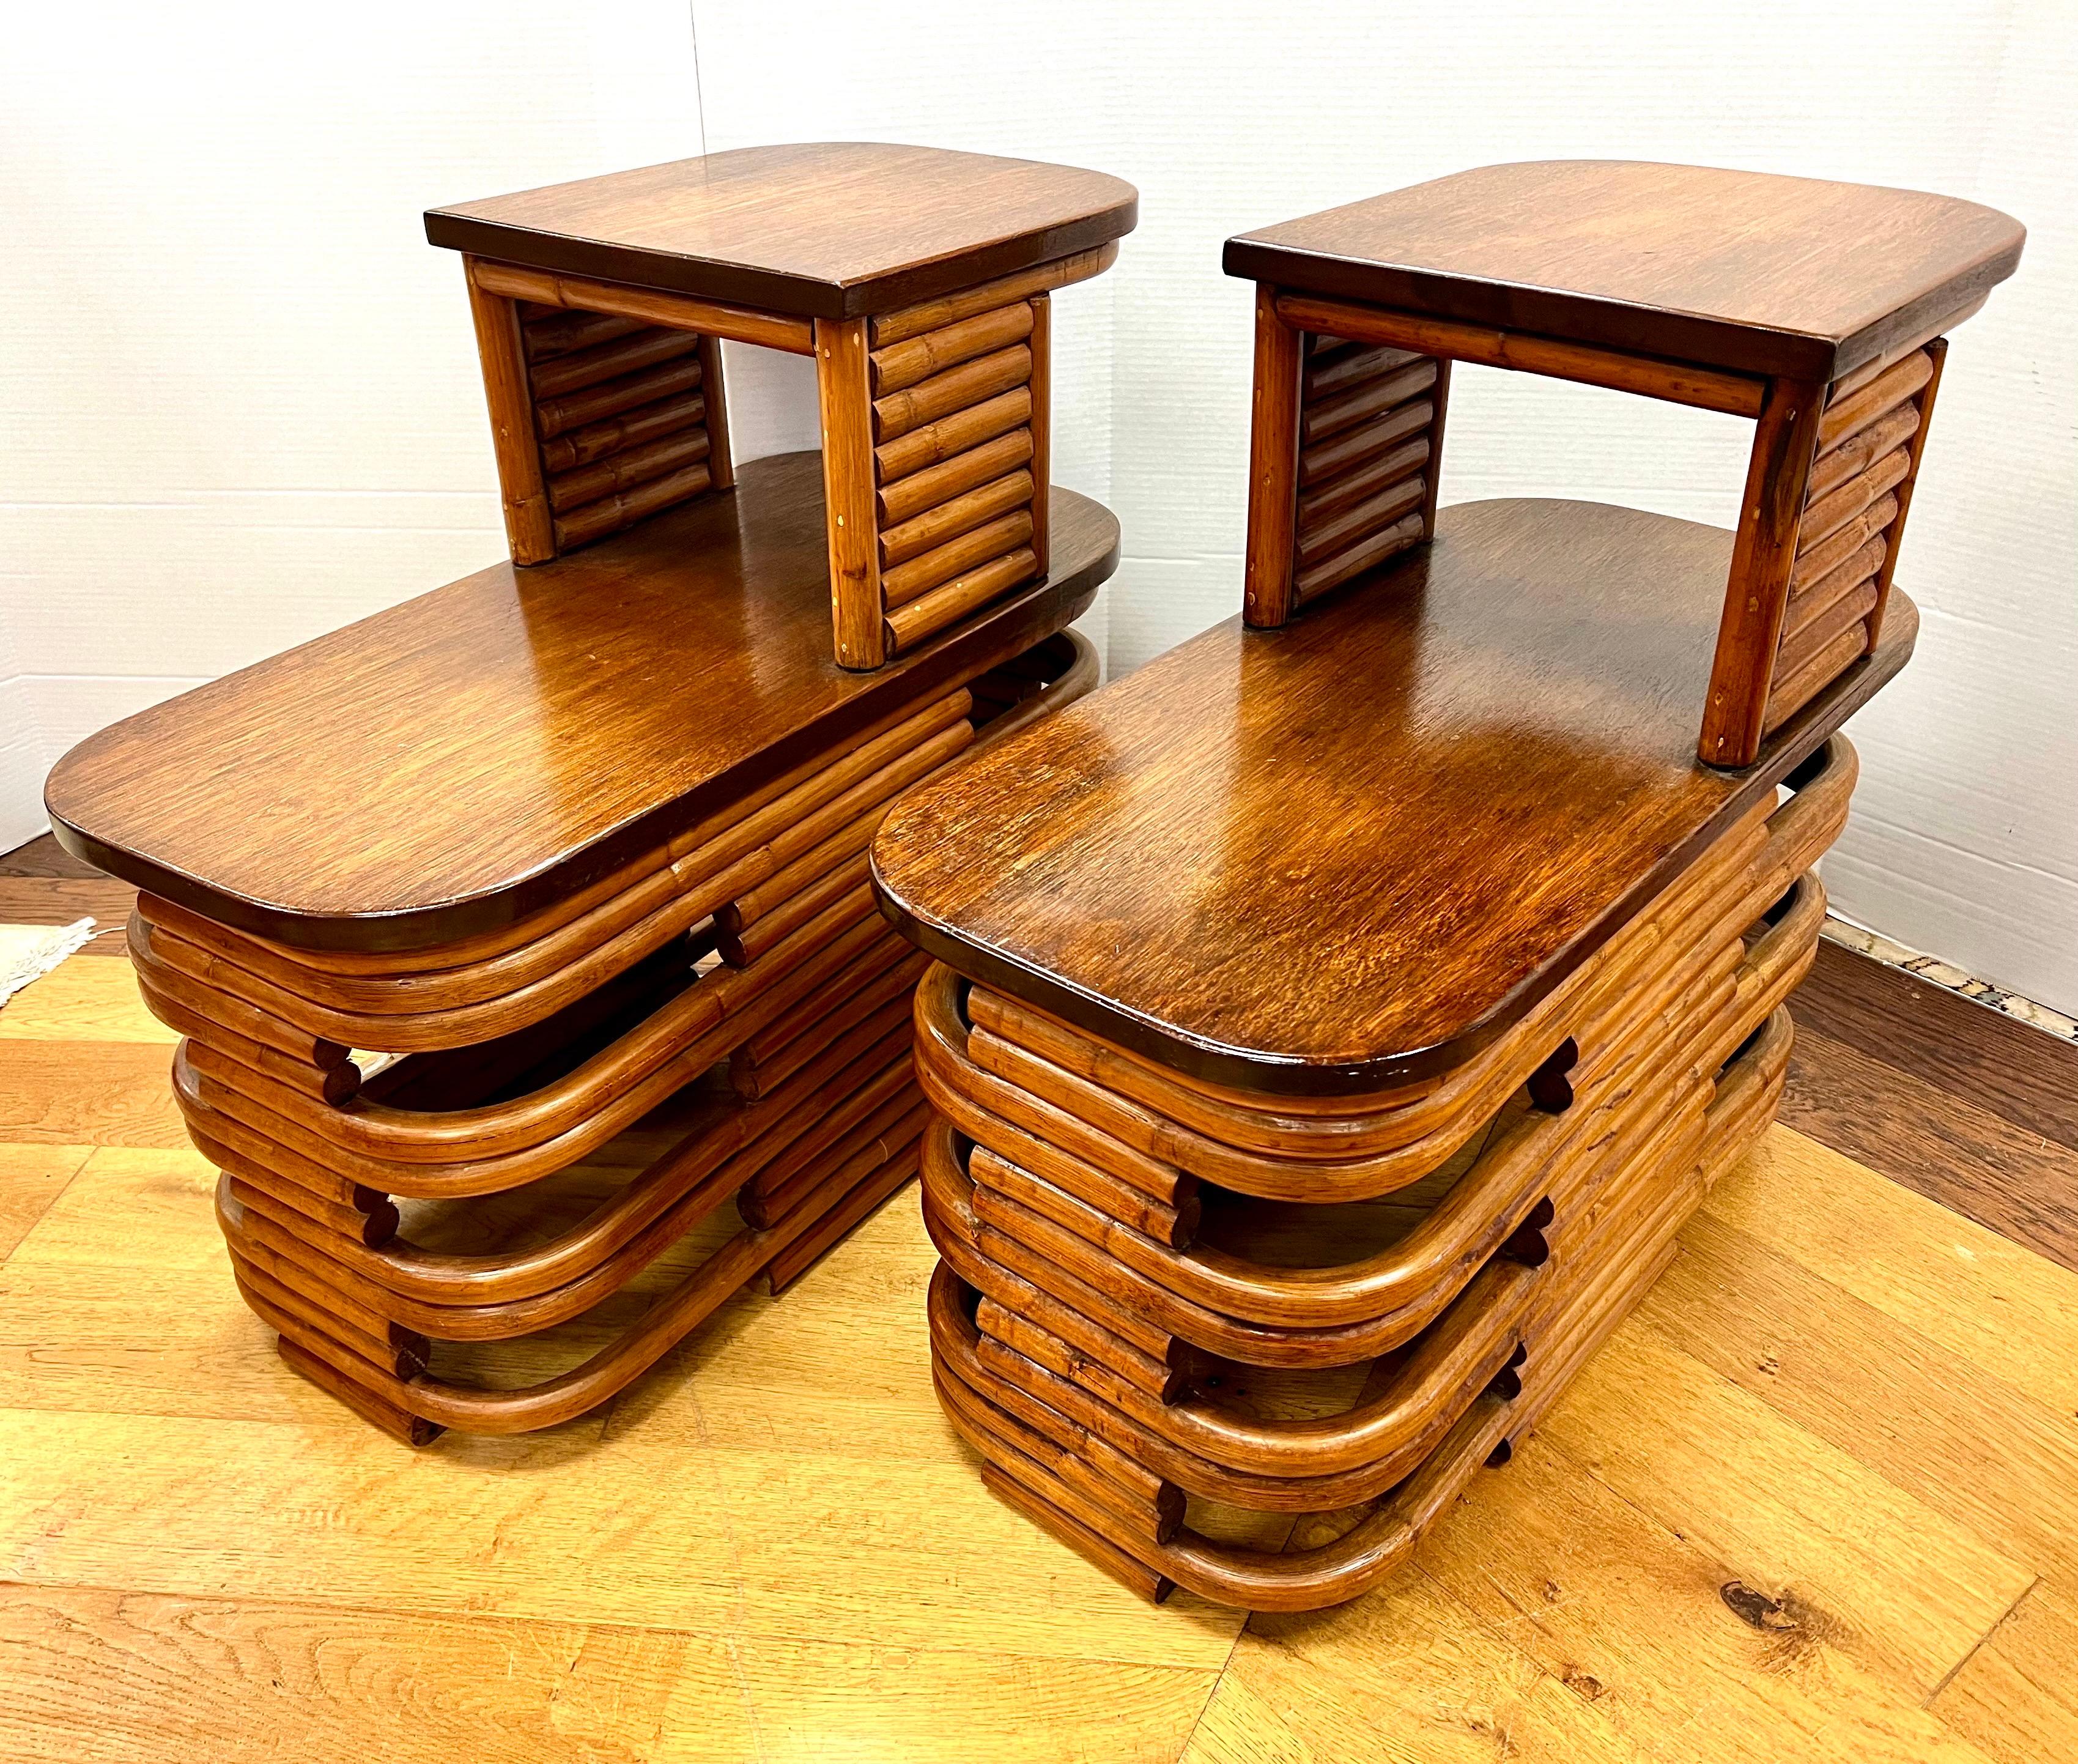 Rare pair of matching Paul Frankl side tables / nightstands, circa early 1940's.
These feature Frankl's coveted two tiered design with mahogany top and stacked bent bamboo frame. Iconic in every way.